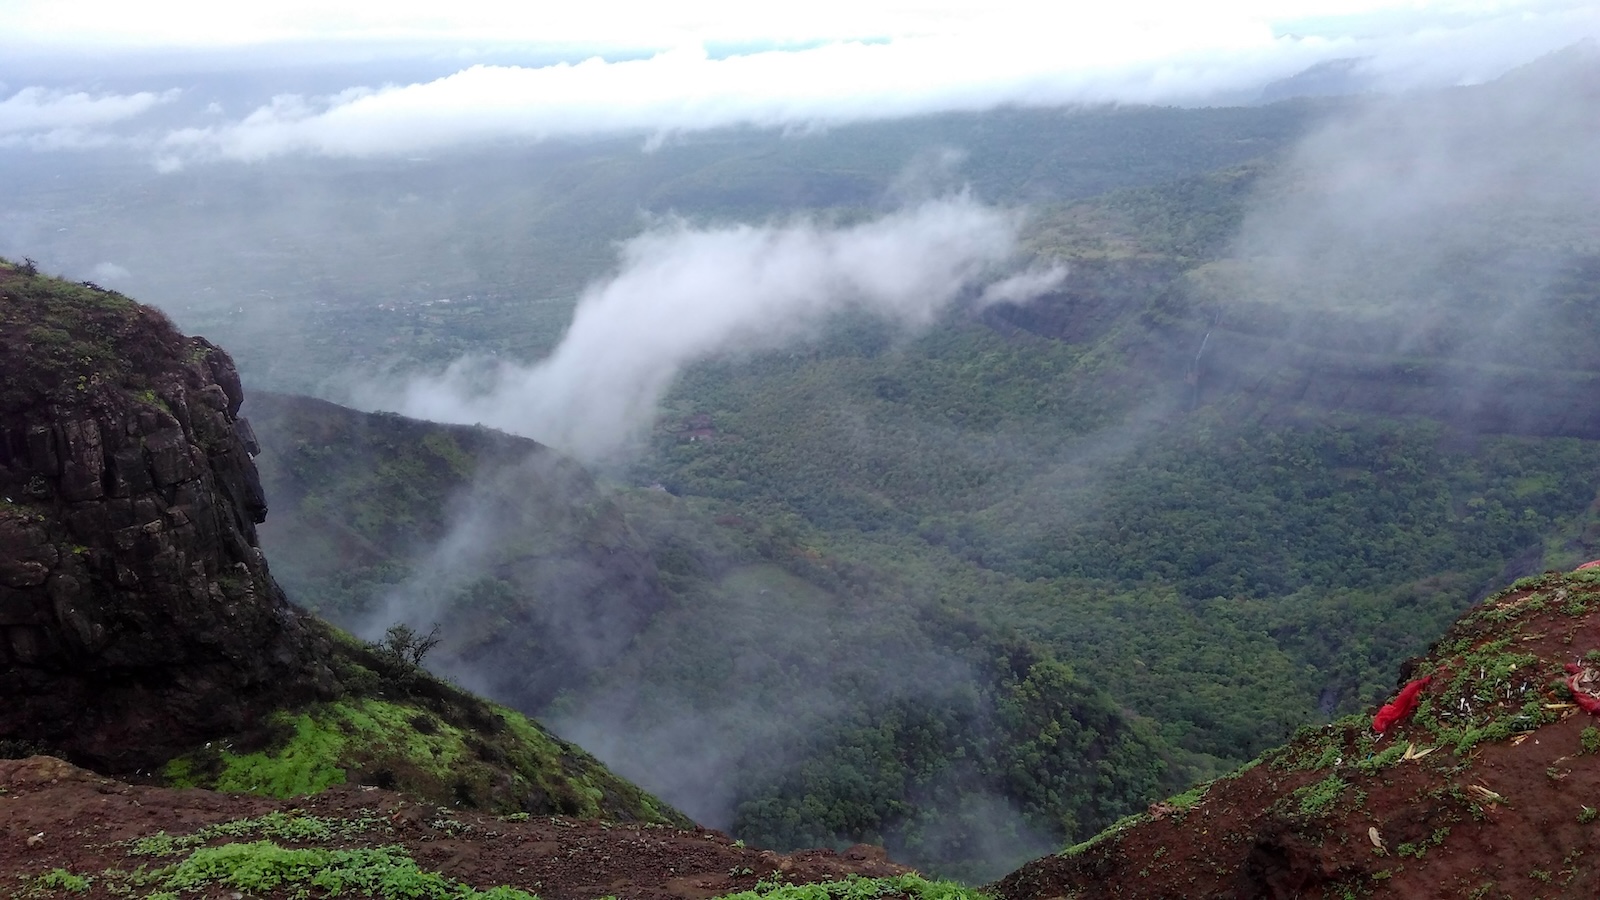 A hill station called Lonavala